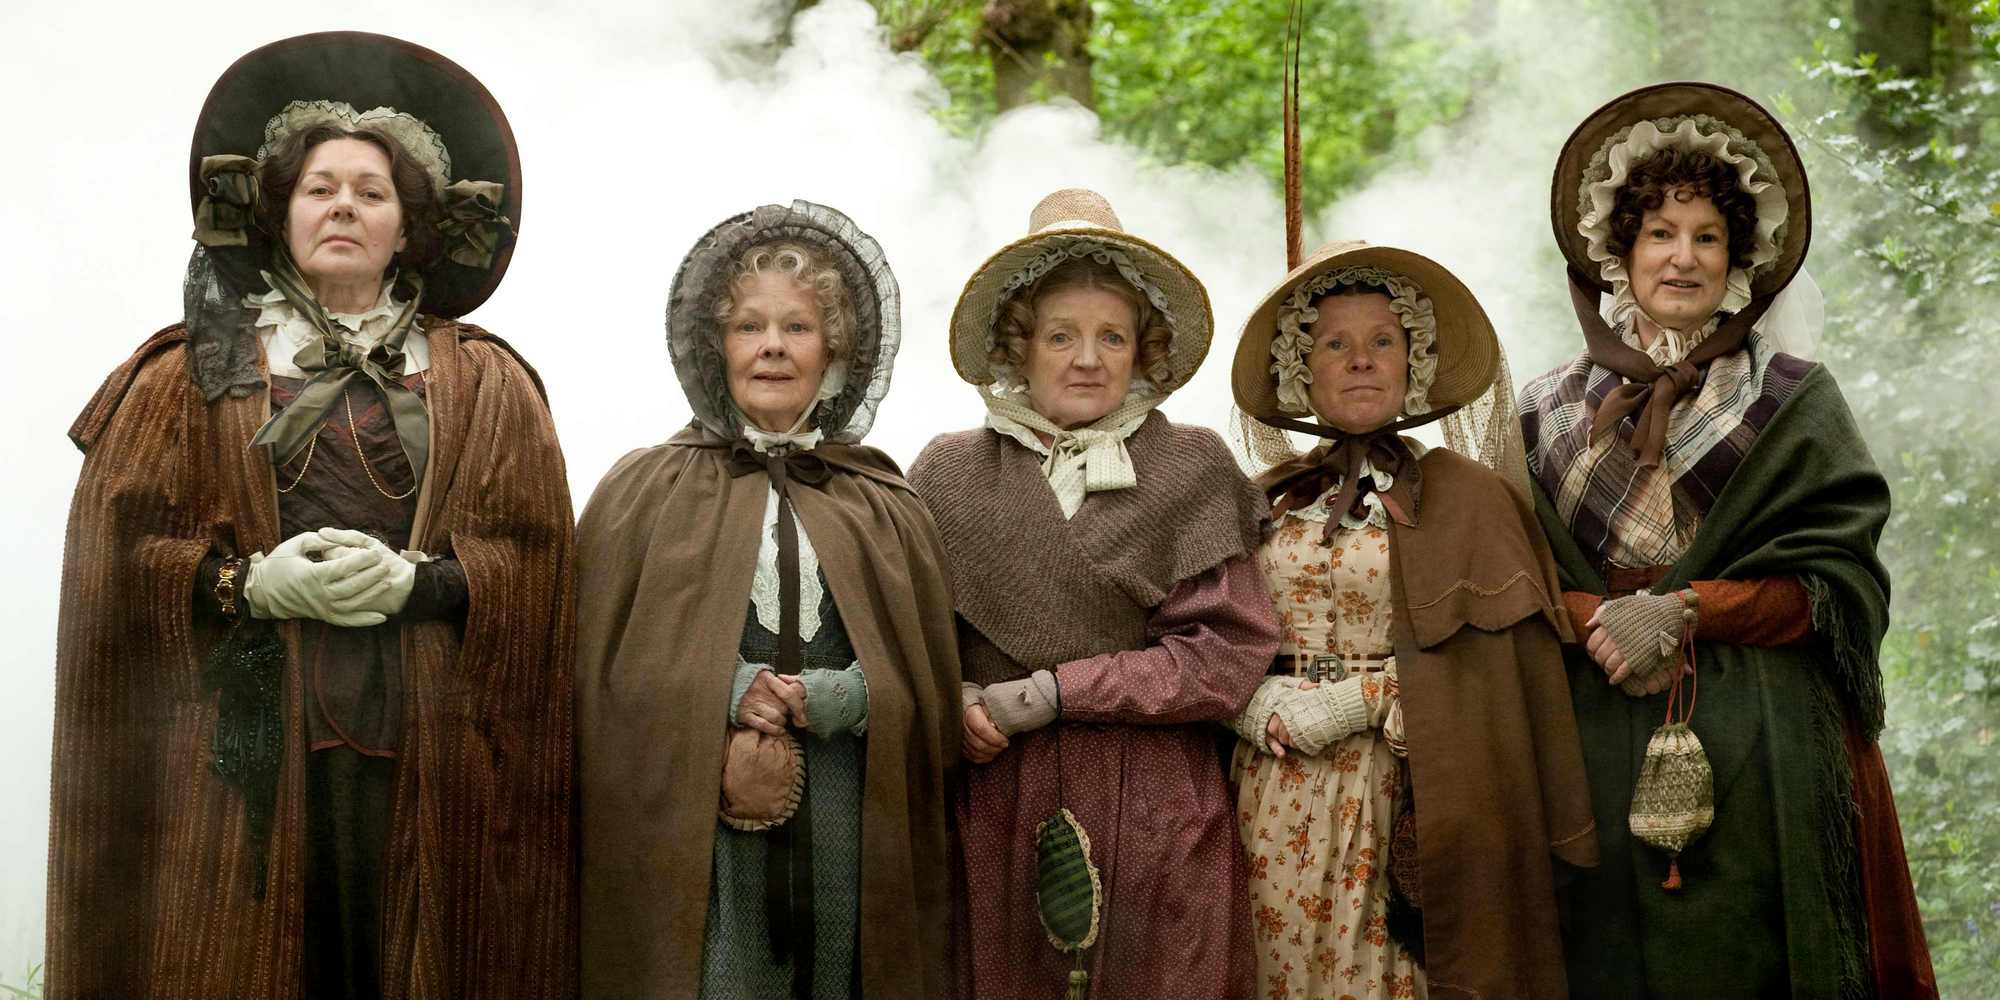 The cast of Cranford Gaskell